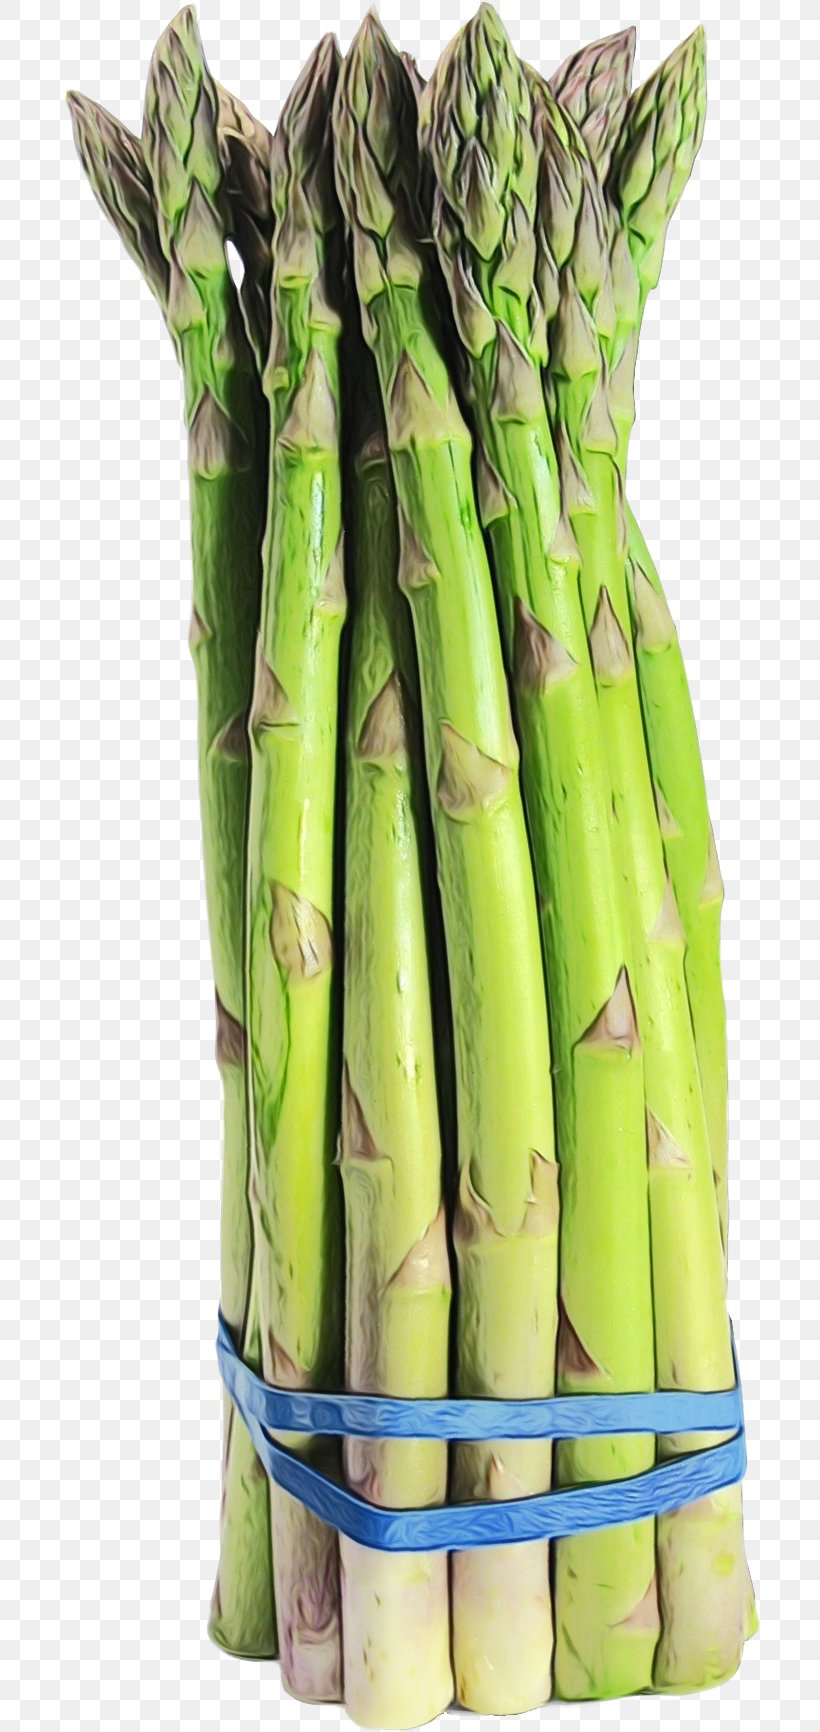 Asparagus Vegetable Bamboo Shoot Plant Food, PNG, 700x1732px, Watercolor, Asparagus, Bamboo, Bamboo Shoot, Food Download Free